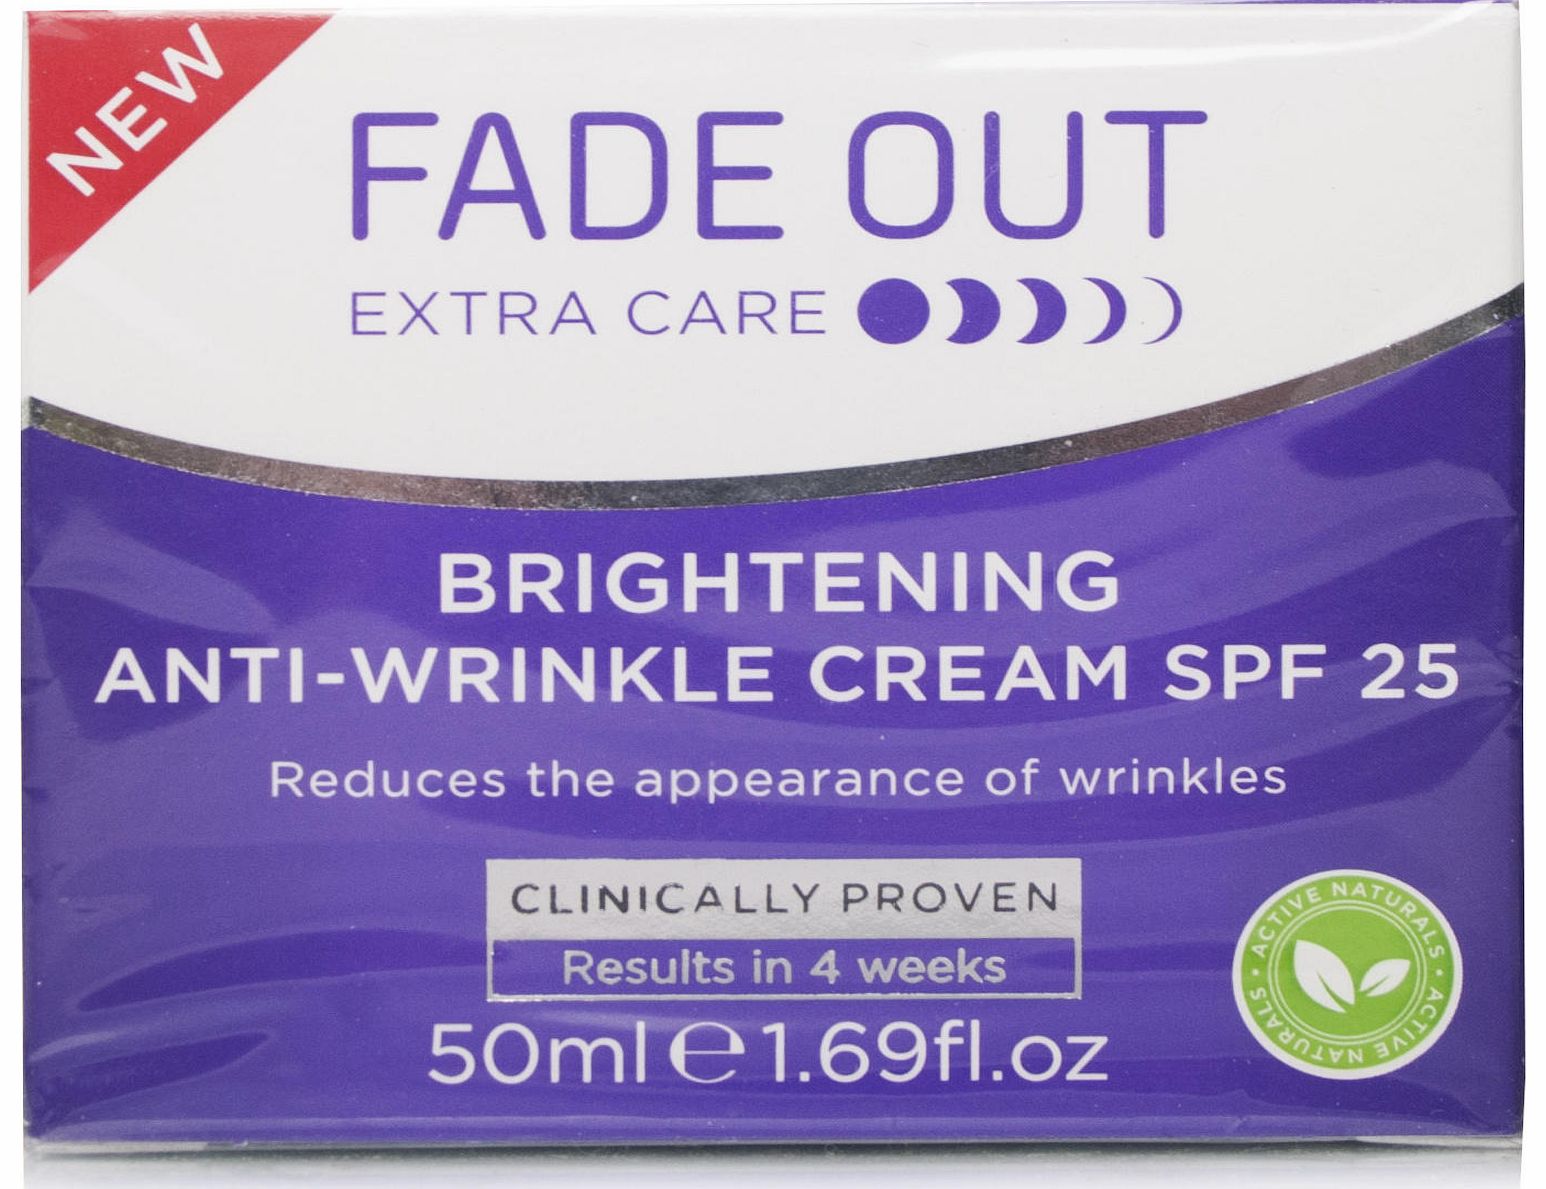 Fade Out Brightening Anti-Wrinkle Cream SPF 25